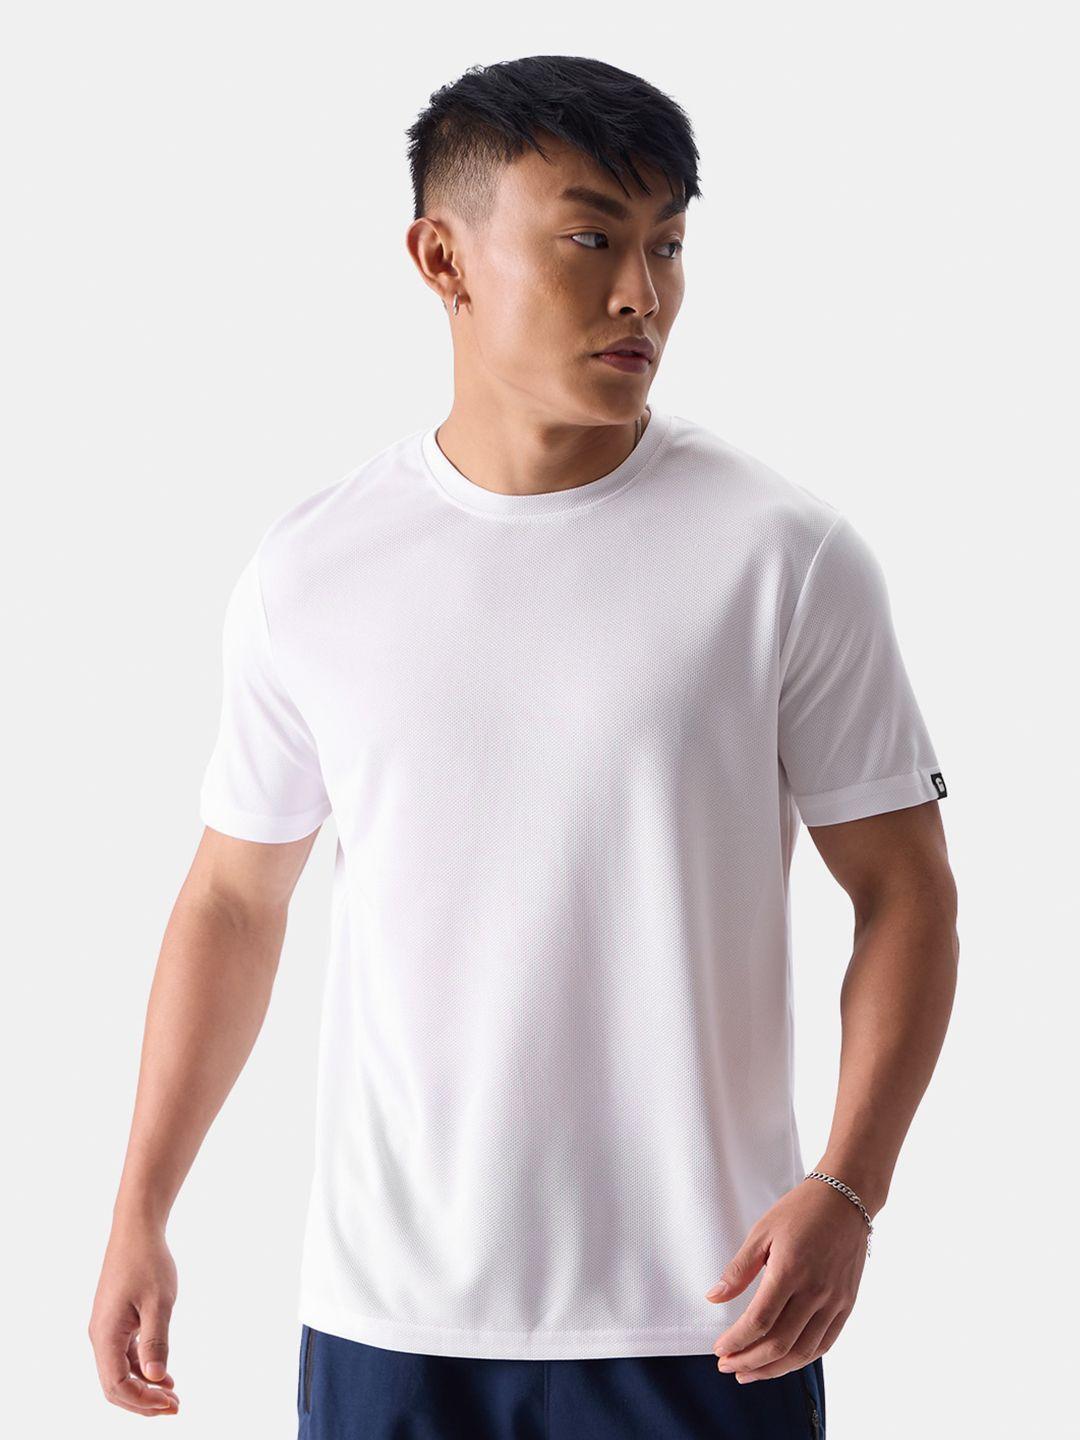 the souled store white round neck t-shirt